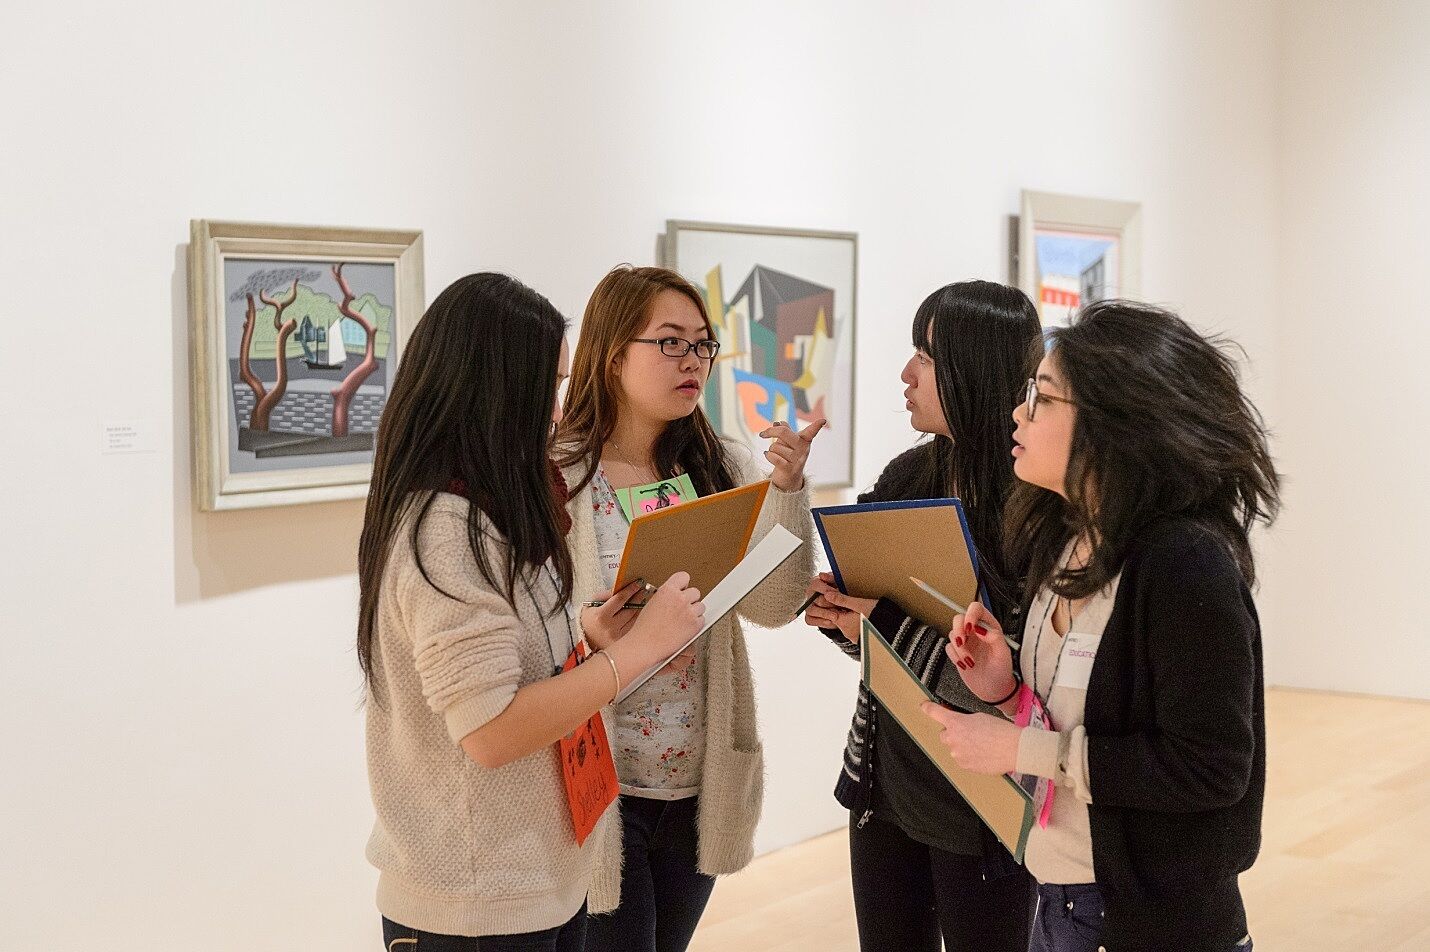 Teens discussing exhibition in galleries.